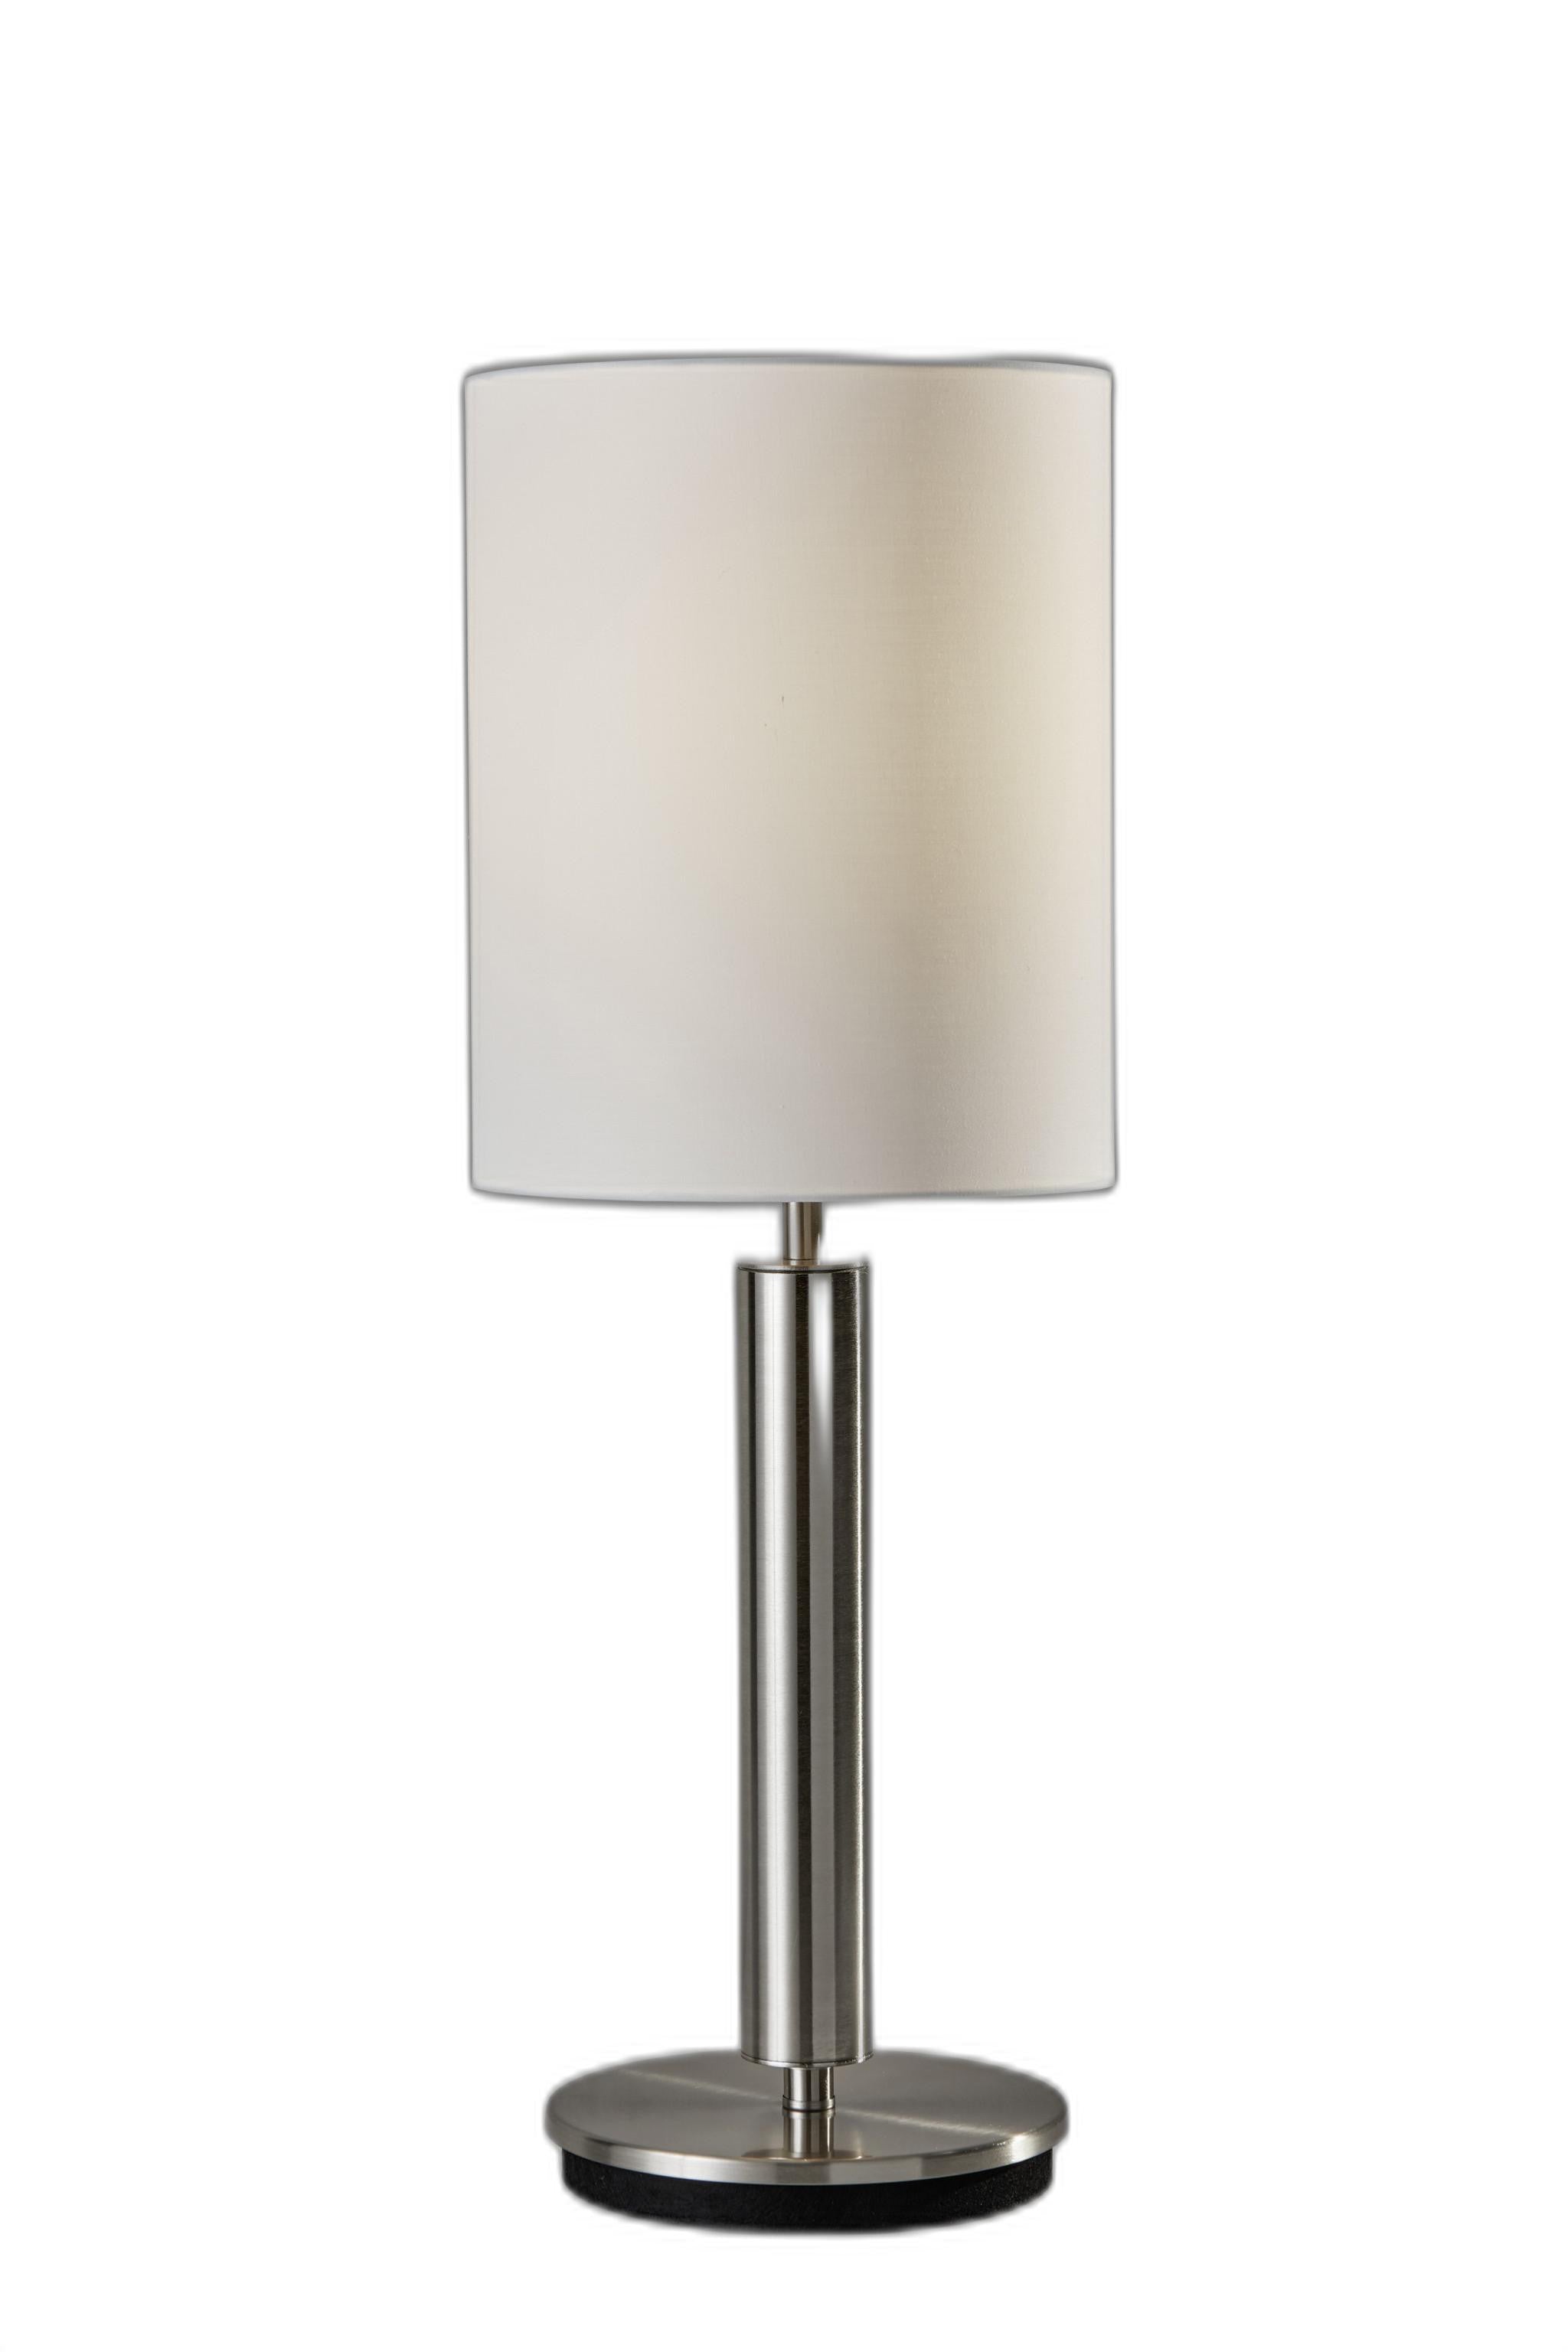 Brushed Steel Metal Stout Pole With Tall Silk Shade Table Lamp